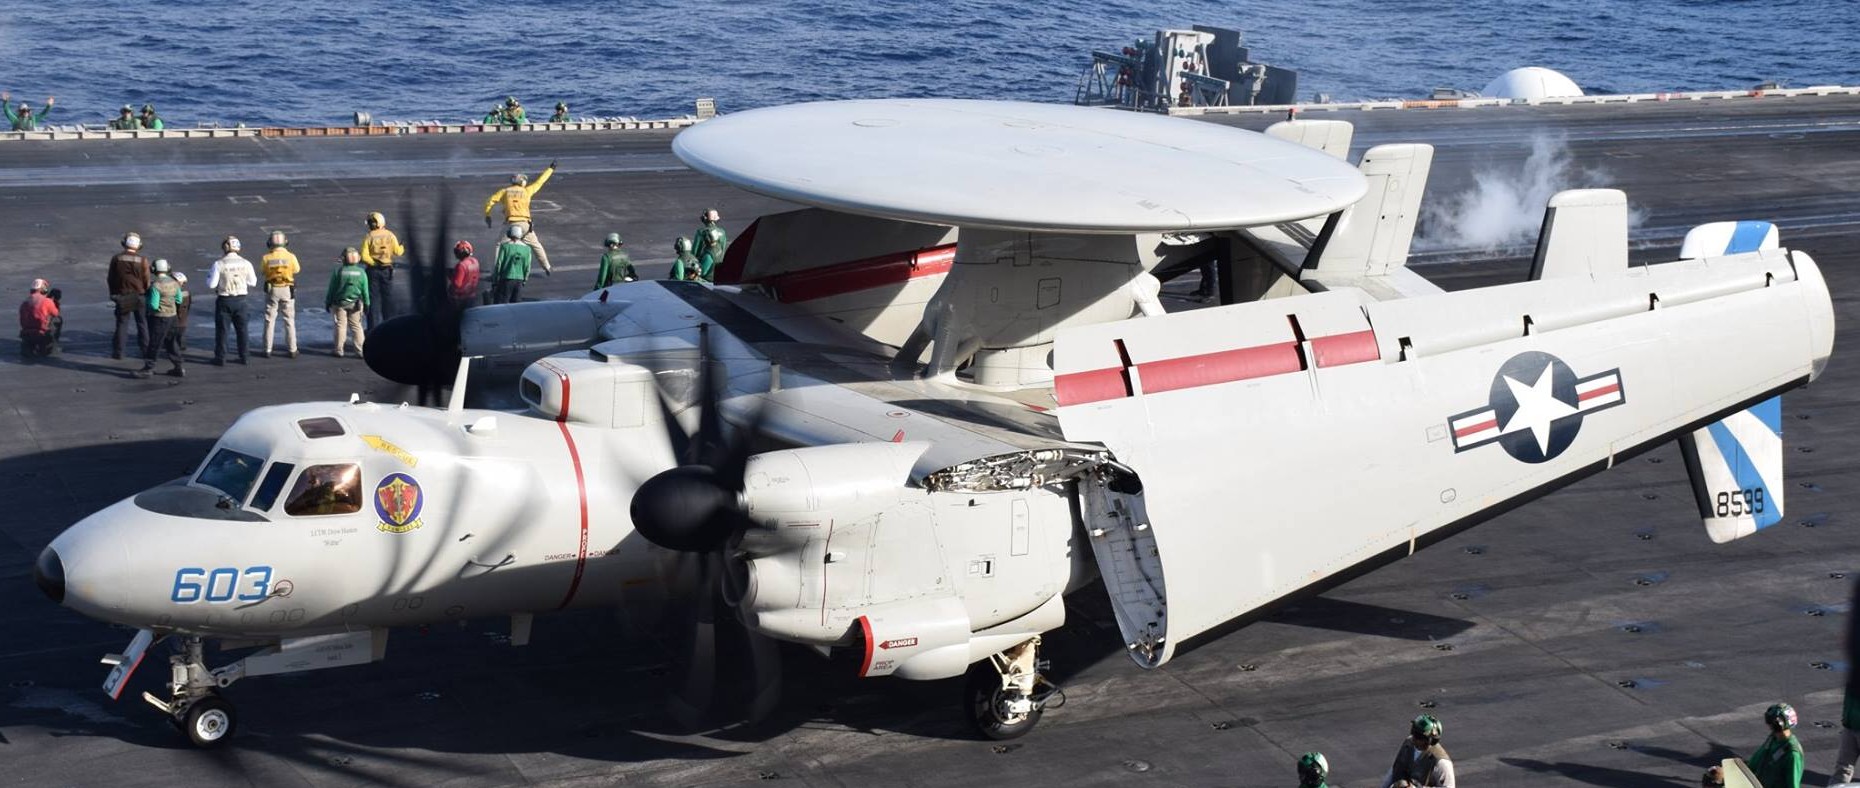 vaw-121 bluetails carrier airborne early warning squadron us navy e-2d advanced hawkeye cvw-7 uss abraham lincoln cvn-72 44